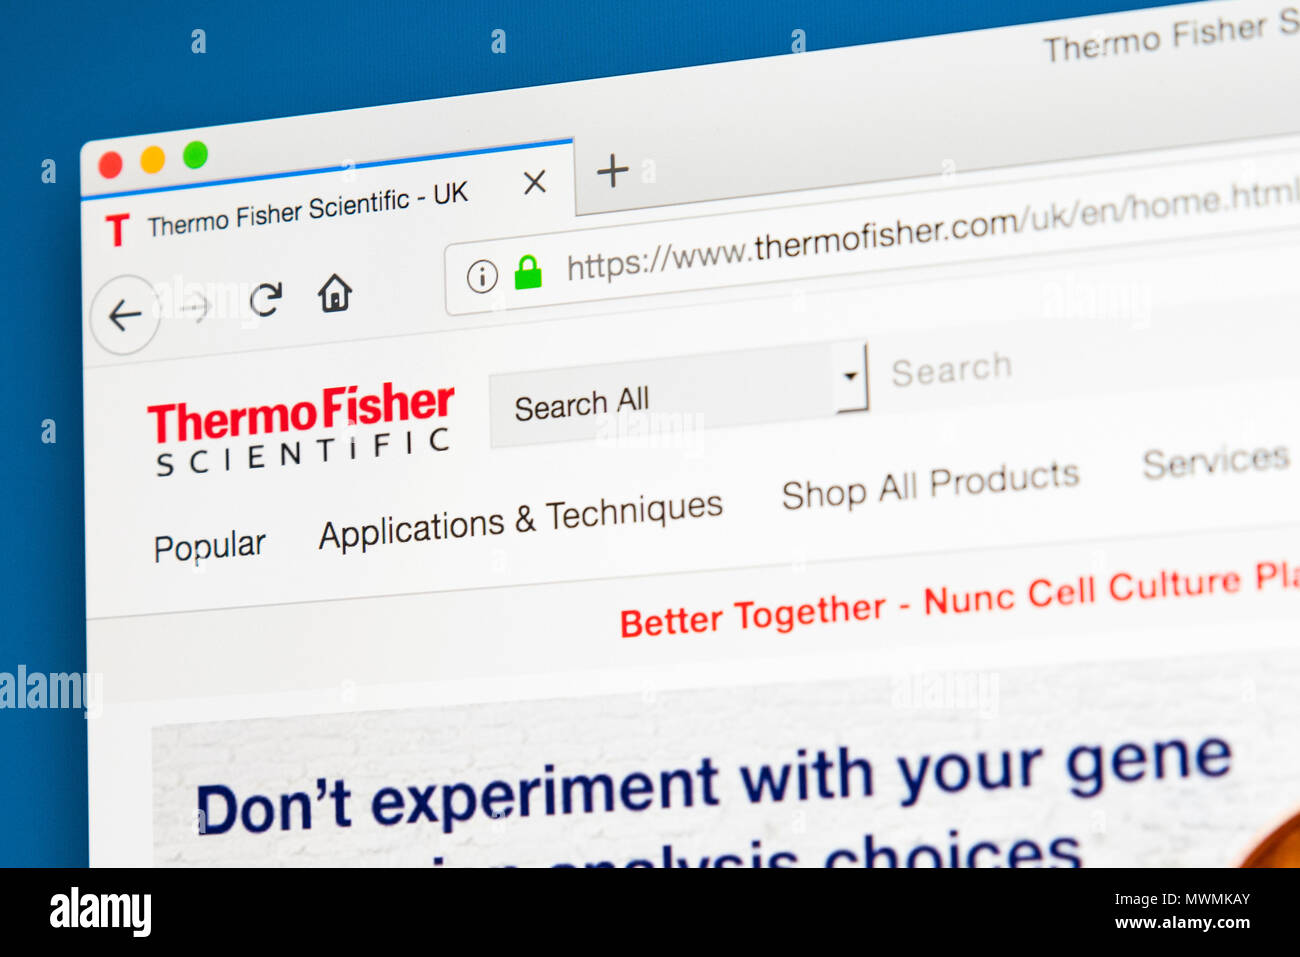 LONDON, UK - MAY 31ST 2018: The homepage of the official website for Thermo Fisher Scientific - the American multinational biotechnology product devel Stock Photo